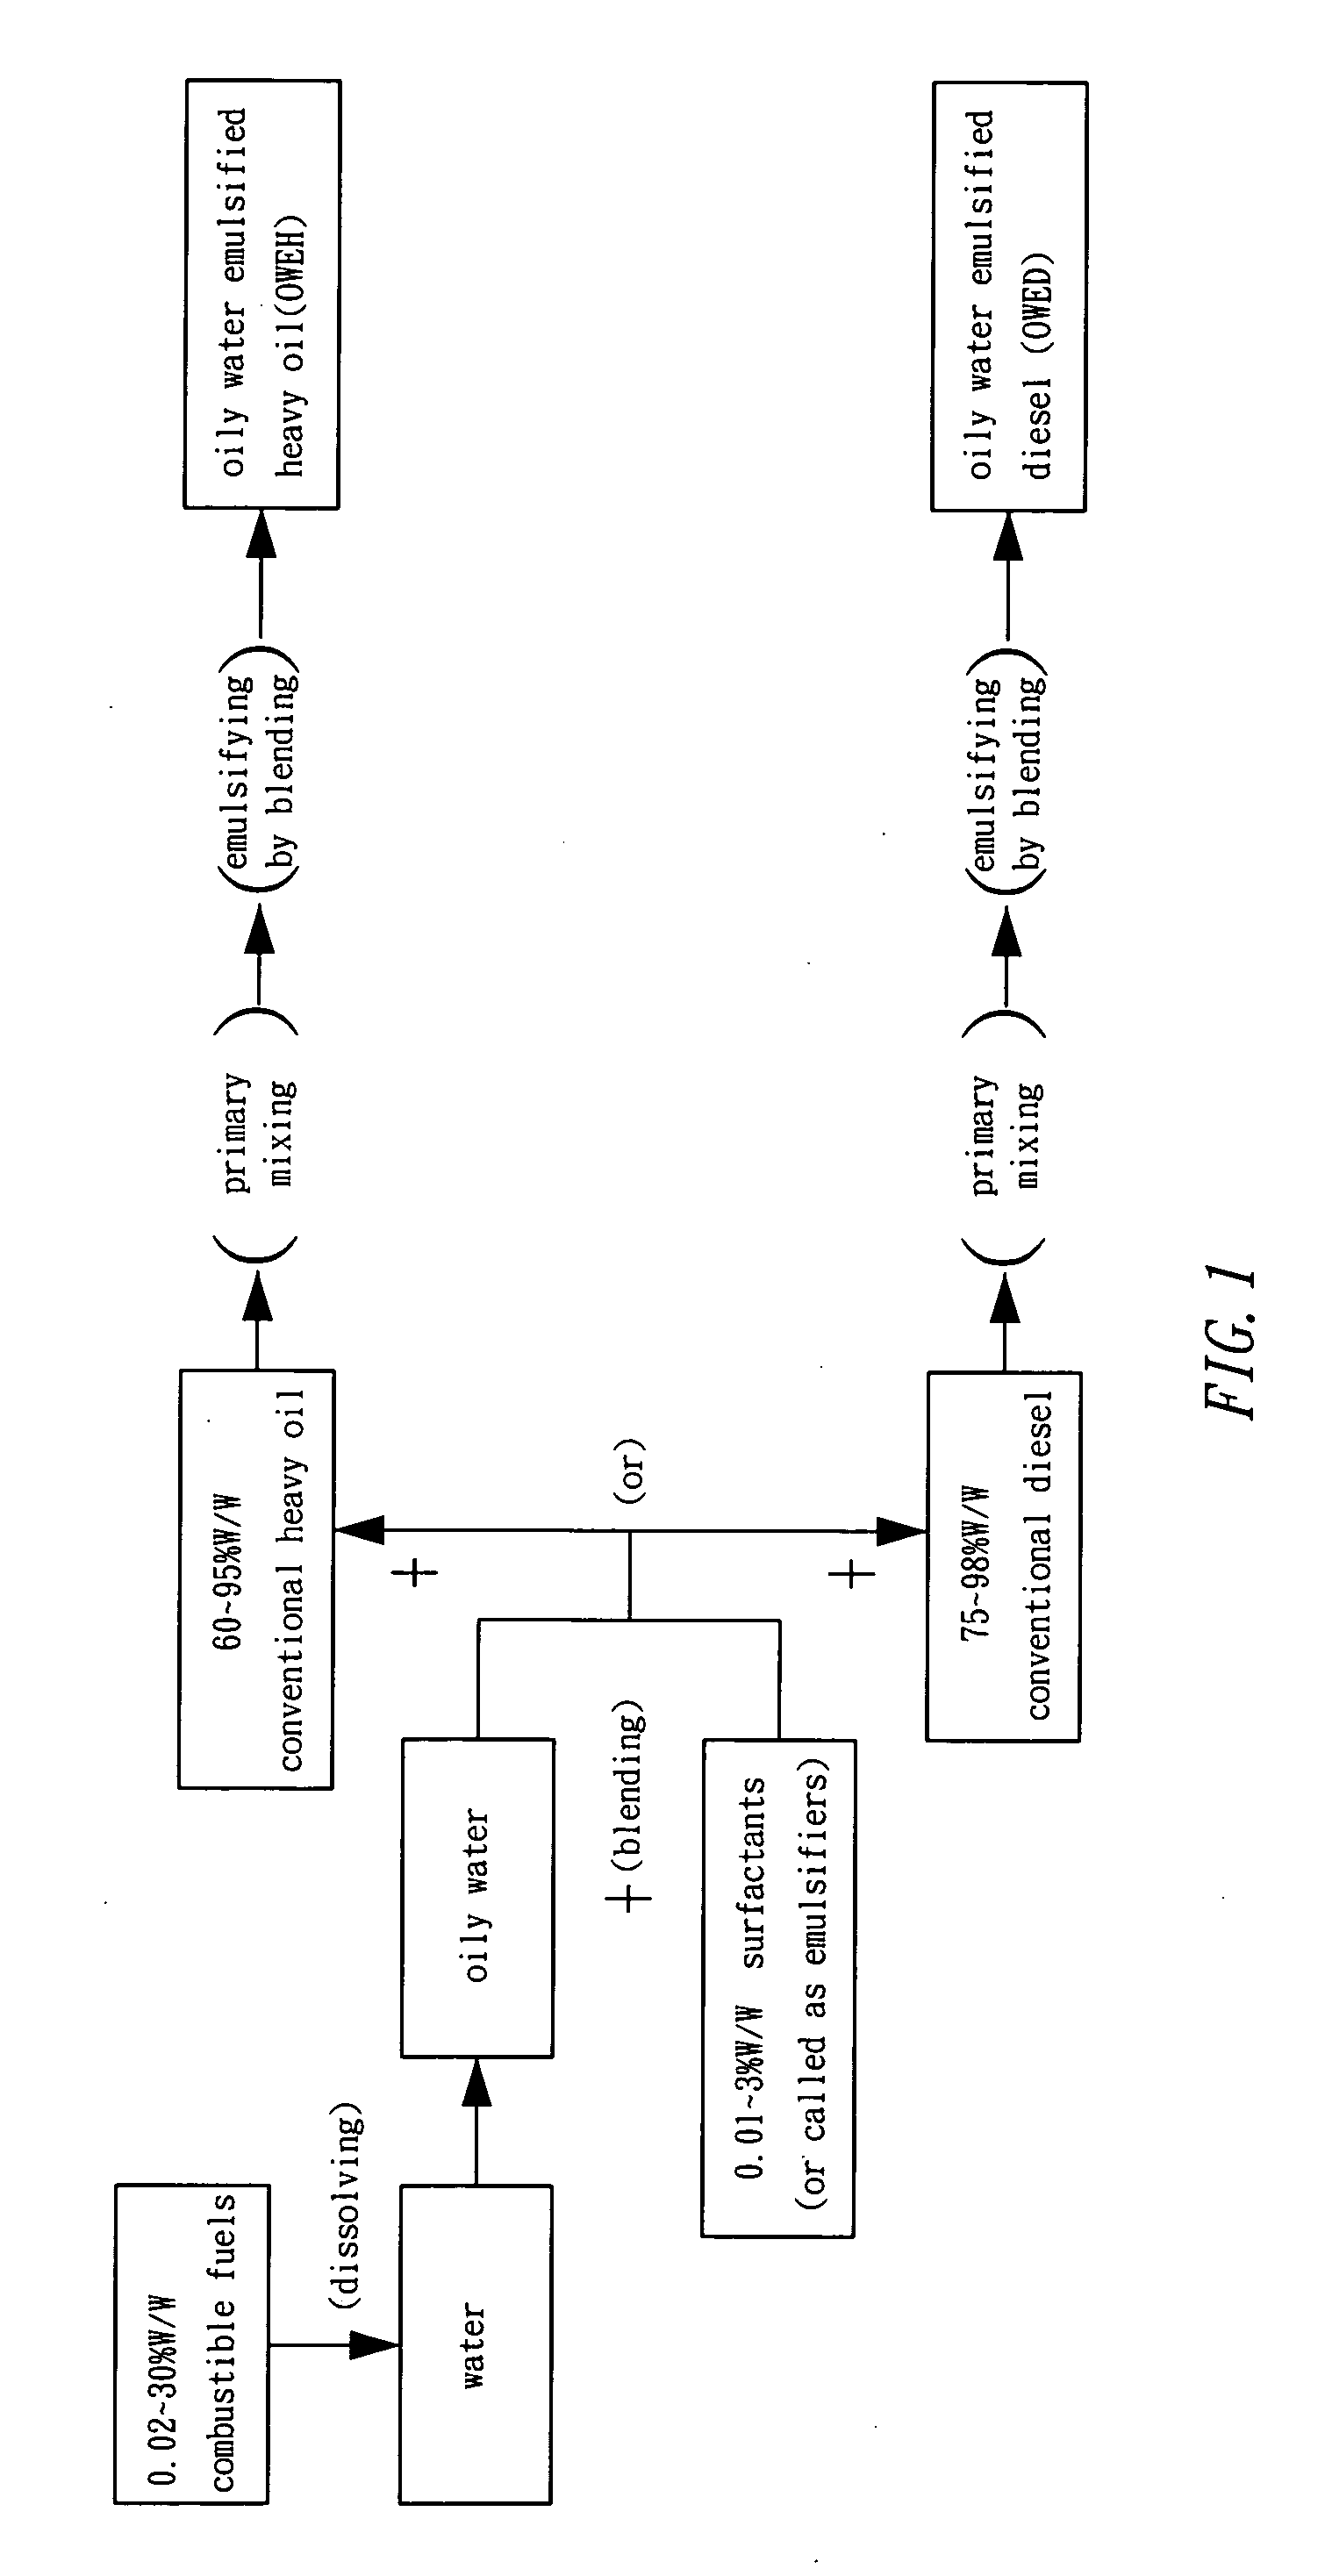 Process for manufacturing emulsified fuels by using oily water